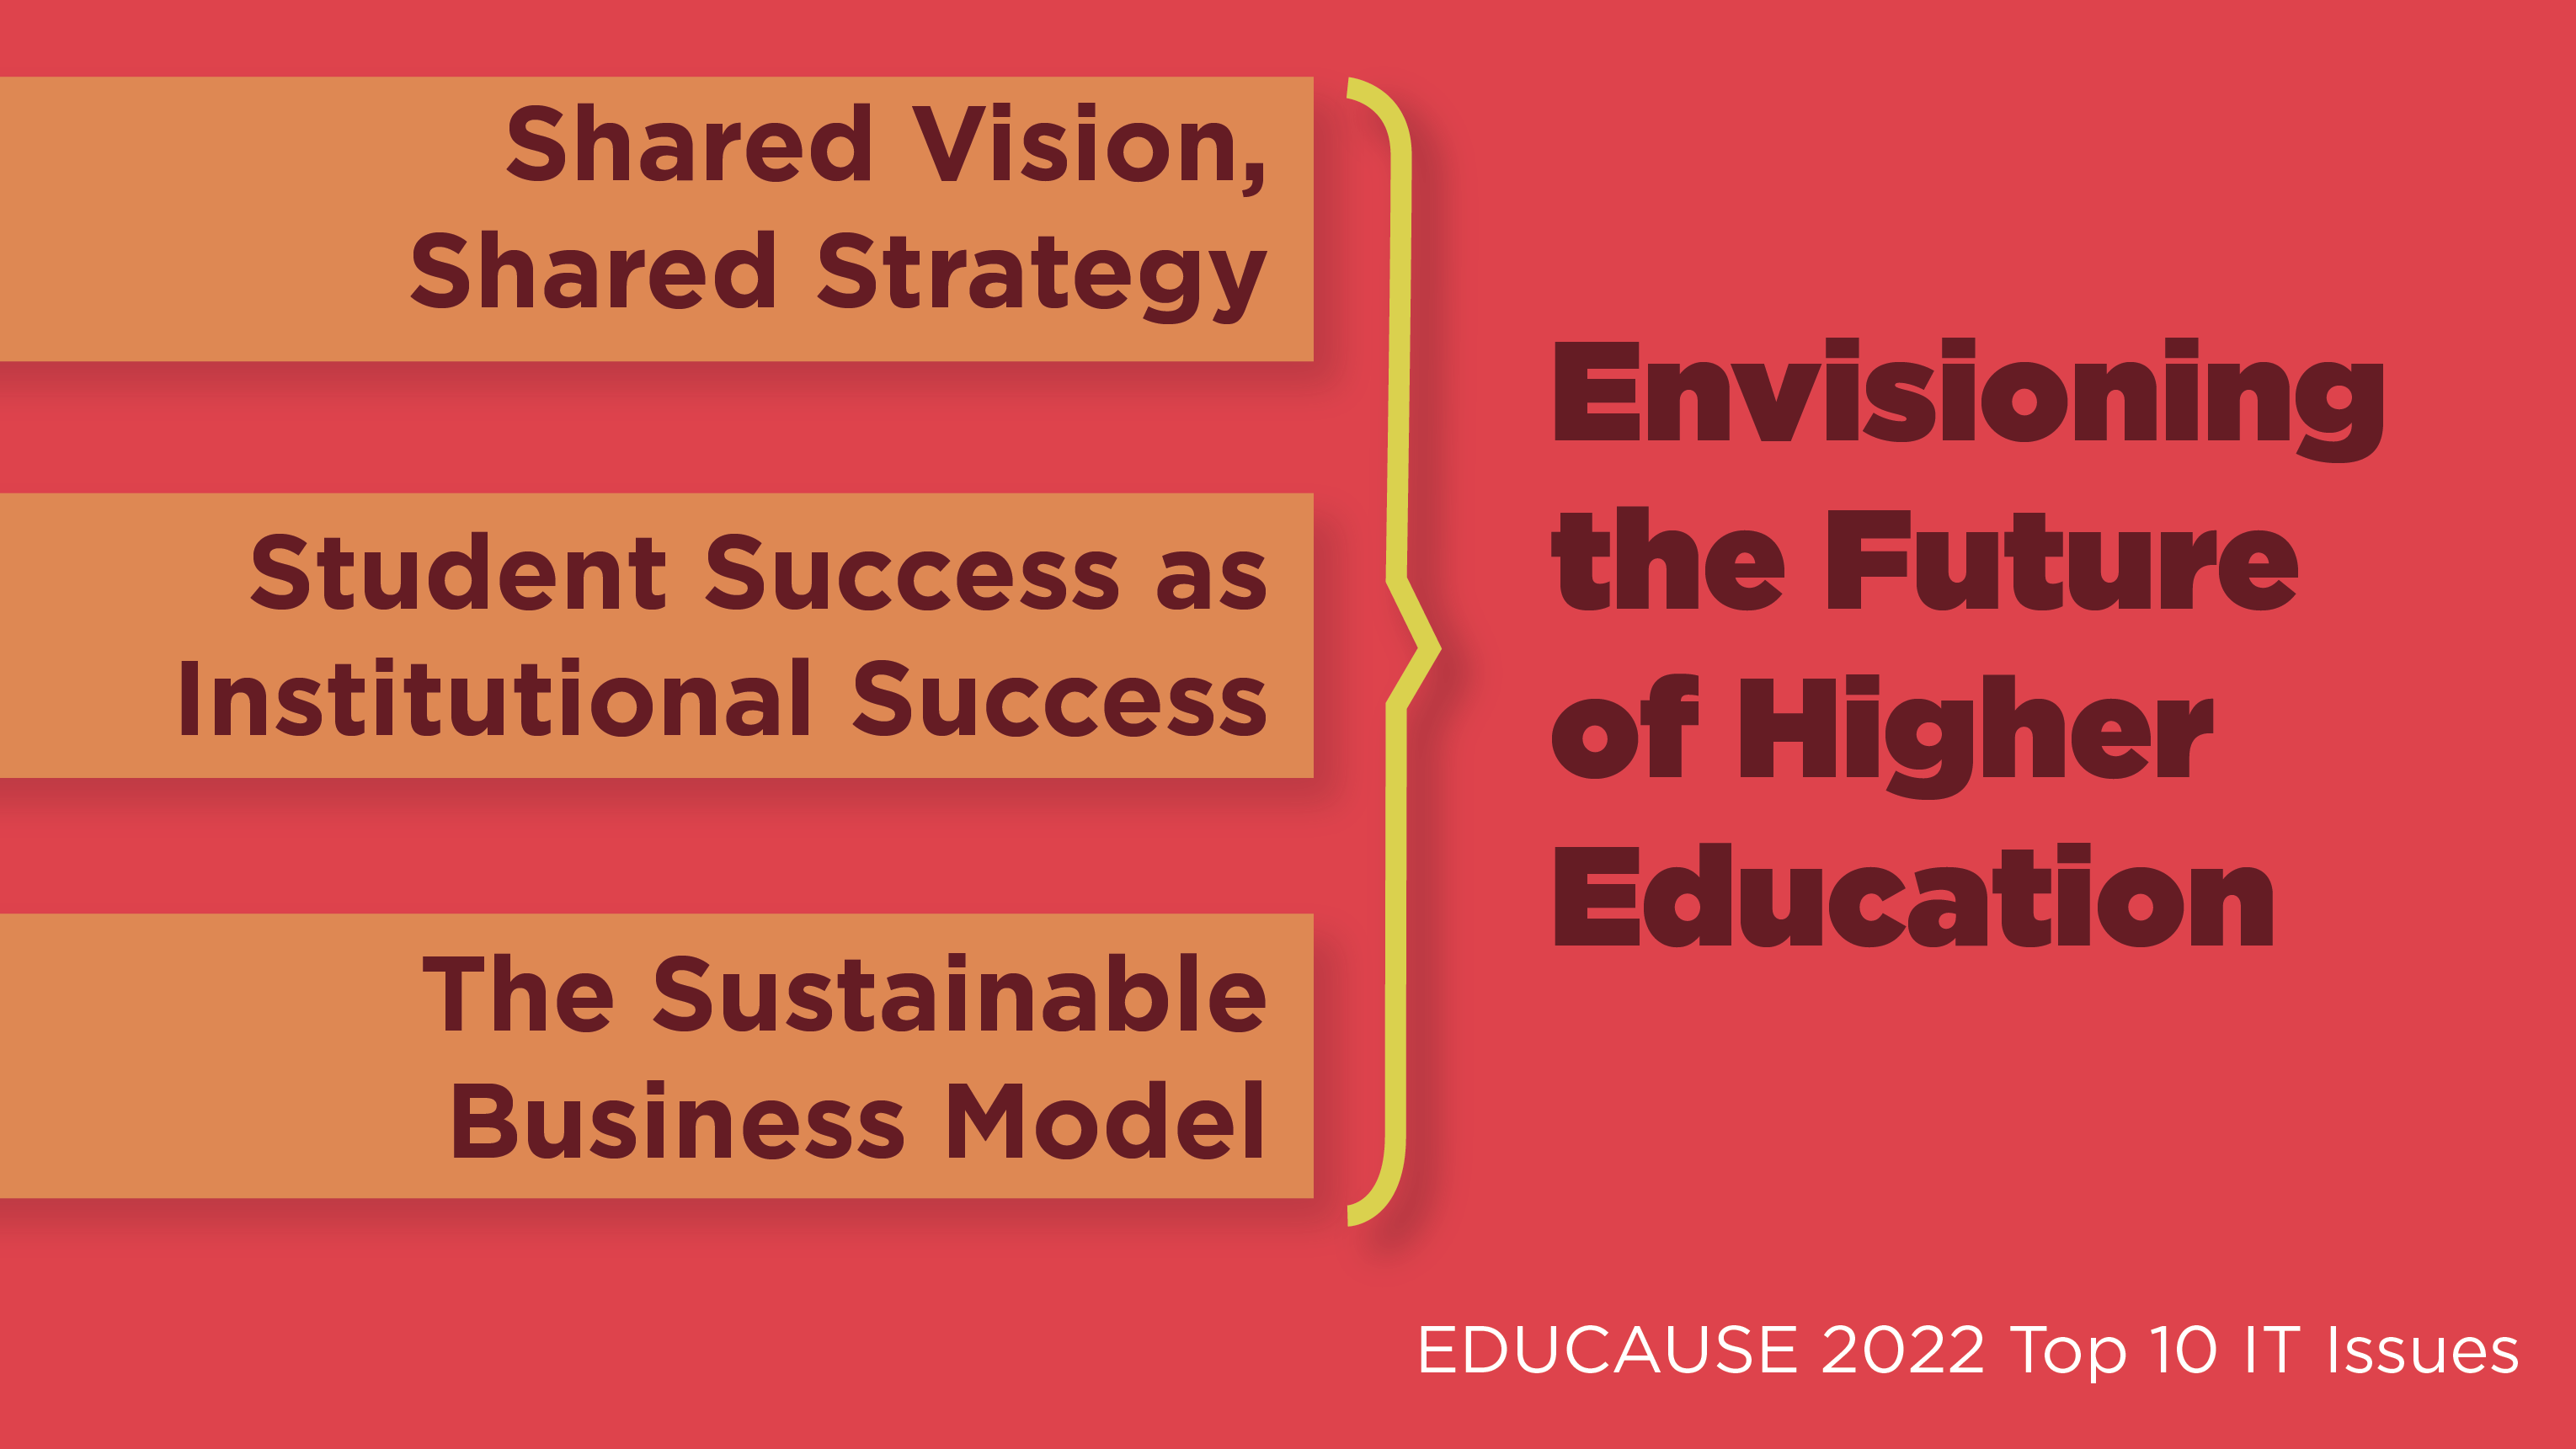 Envisioning the Future of Higher Education: Shared Vision, Shared Strategy; Student Success as Institutional Success; The Sustainable Business Model. EDUCAUSE 2022 Top 10 IT Issues.